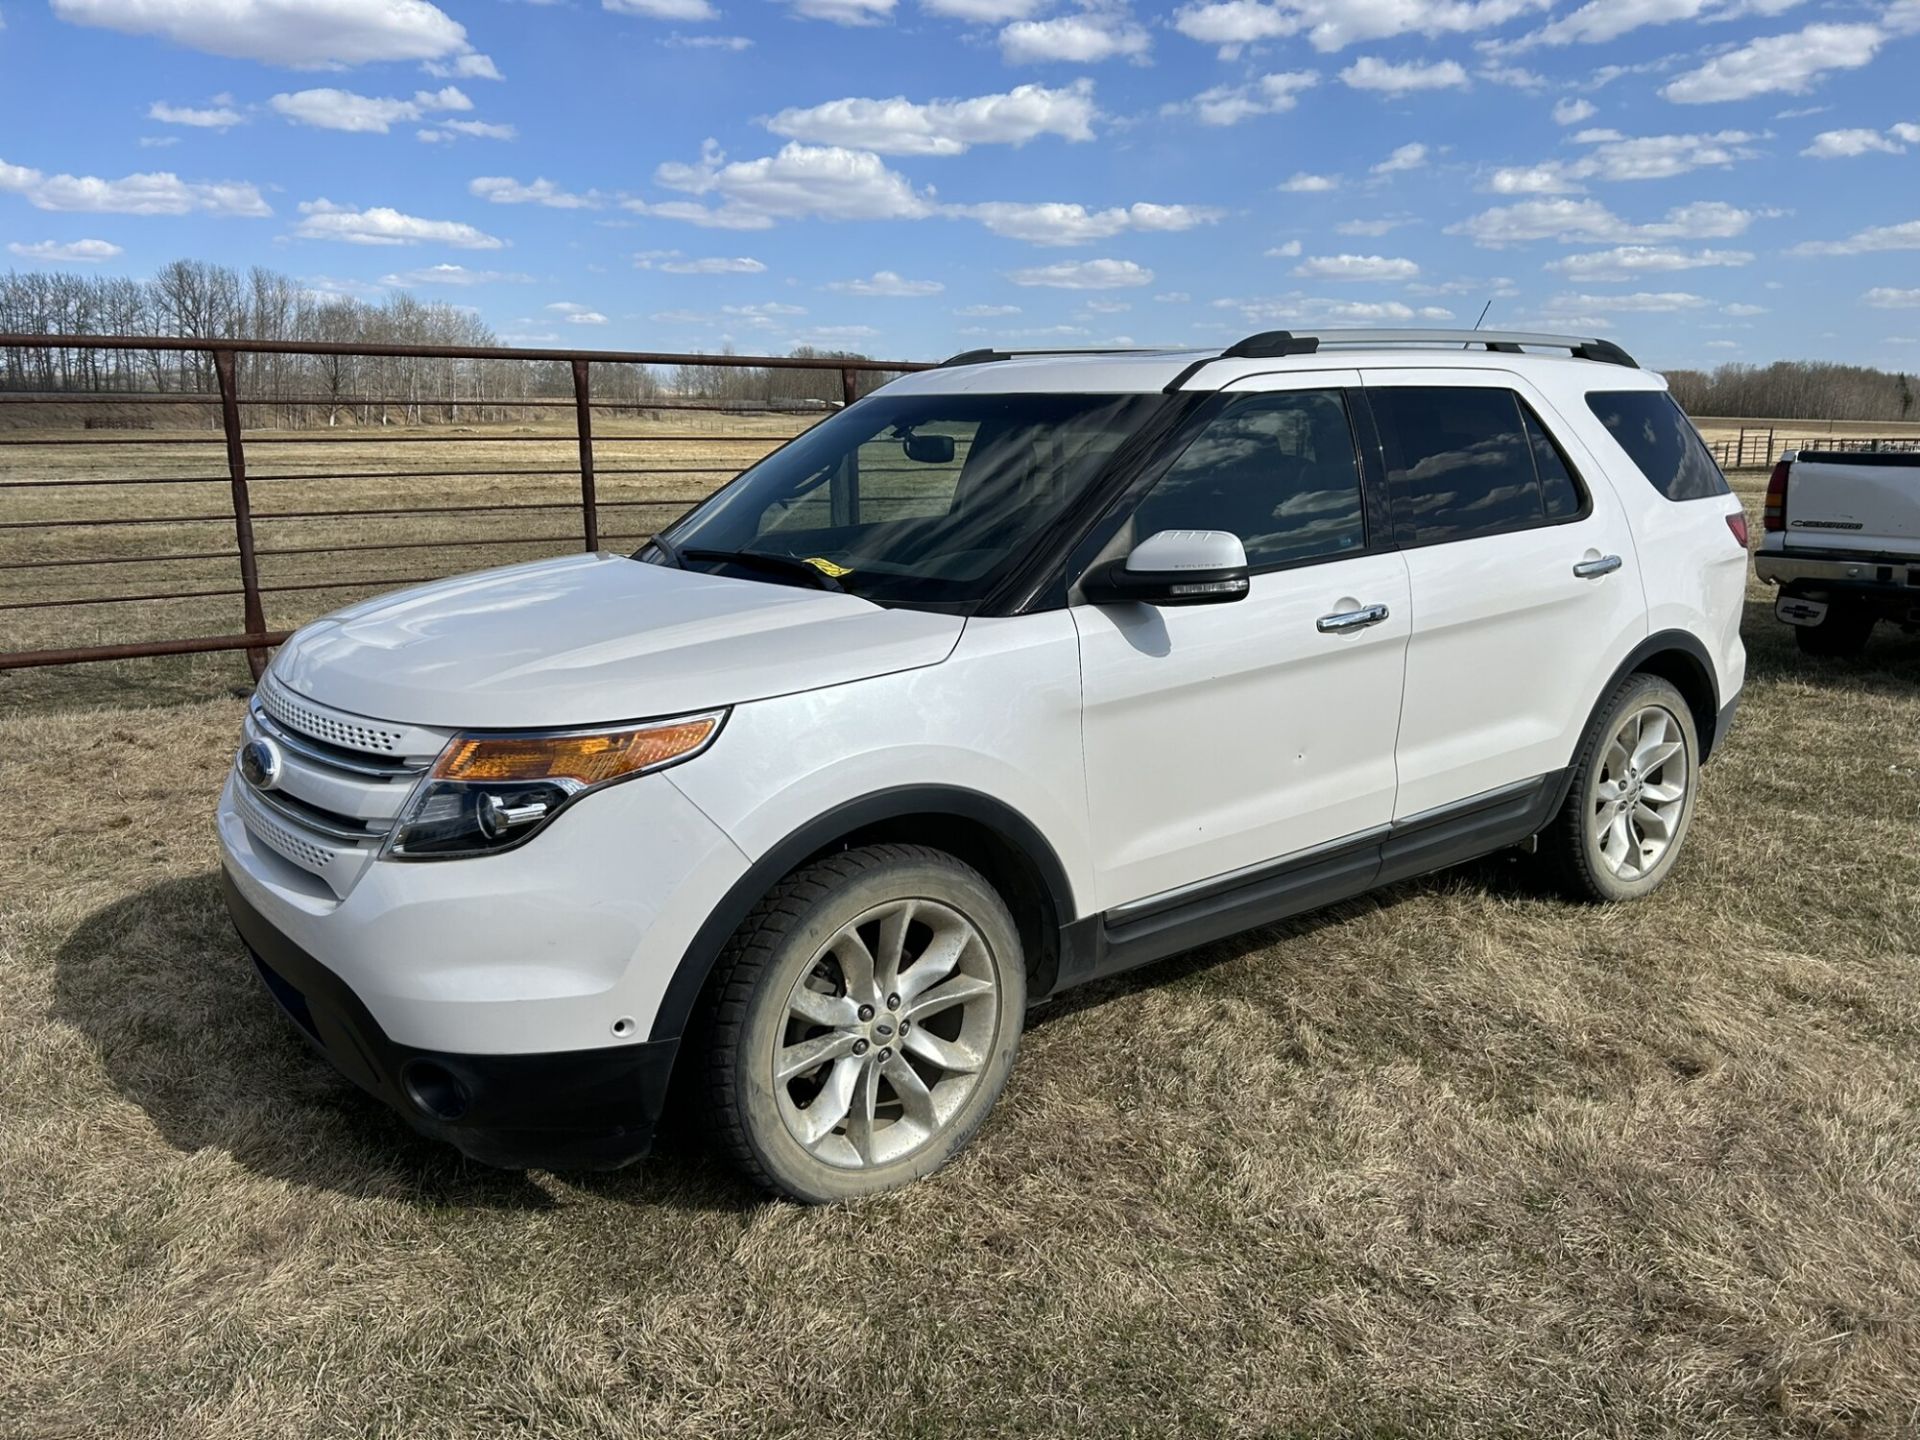 2011 FORD EXPLORER SUV LIMITED, FULL LOAD, AWD. 3.5L V6 - NOTE** TRANS NEEDS REPAIR OR REPLACEMENT